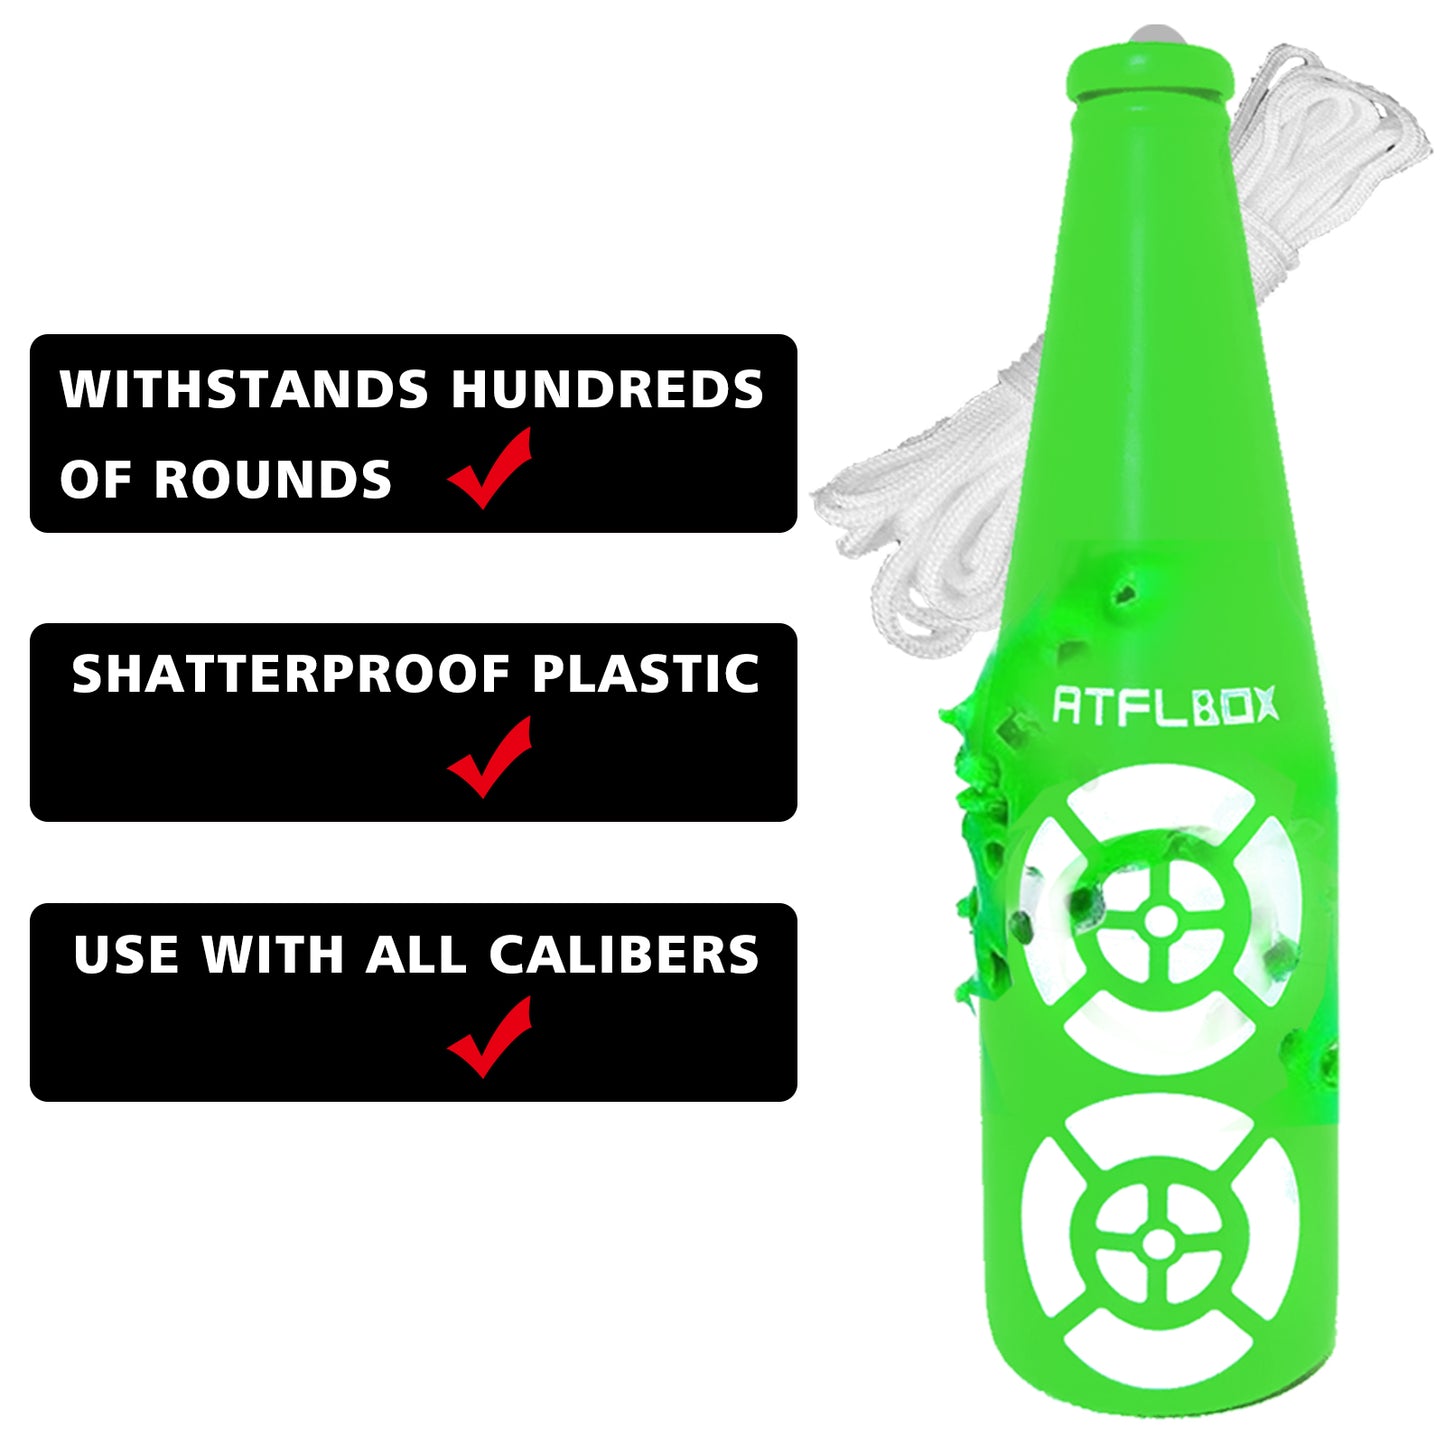 ATFLBOX Shatterproof Plastic Bottle Target for Shooting, 6 Bright Colors with Hanging Rope for Target Practice, Ideal for Indoor and Outdoor Training